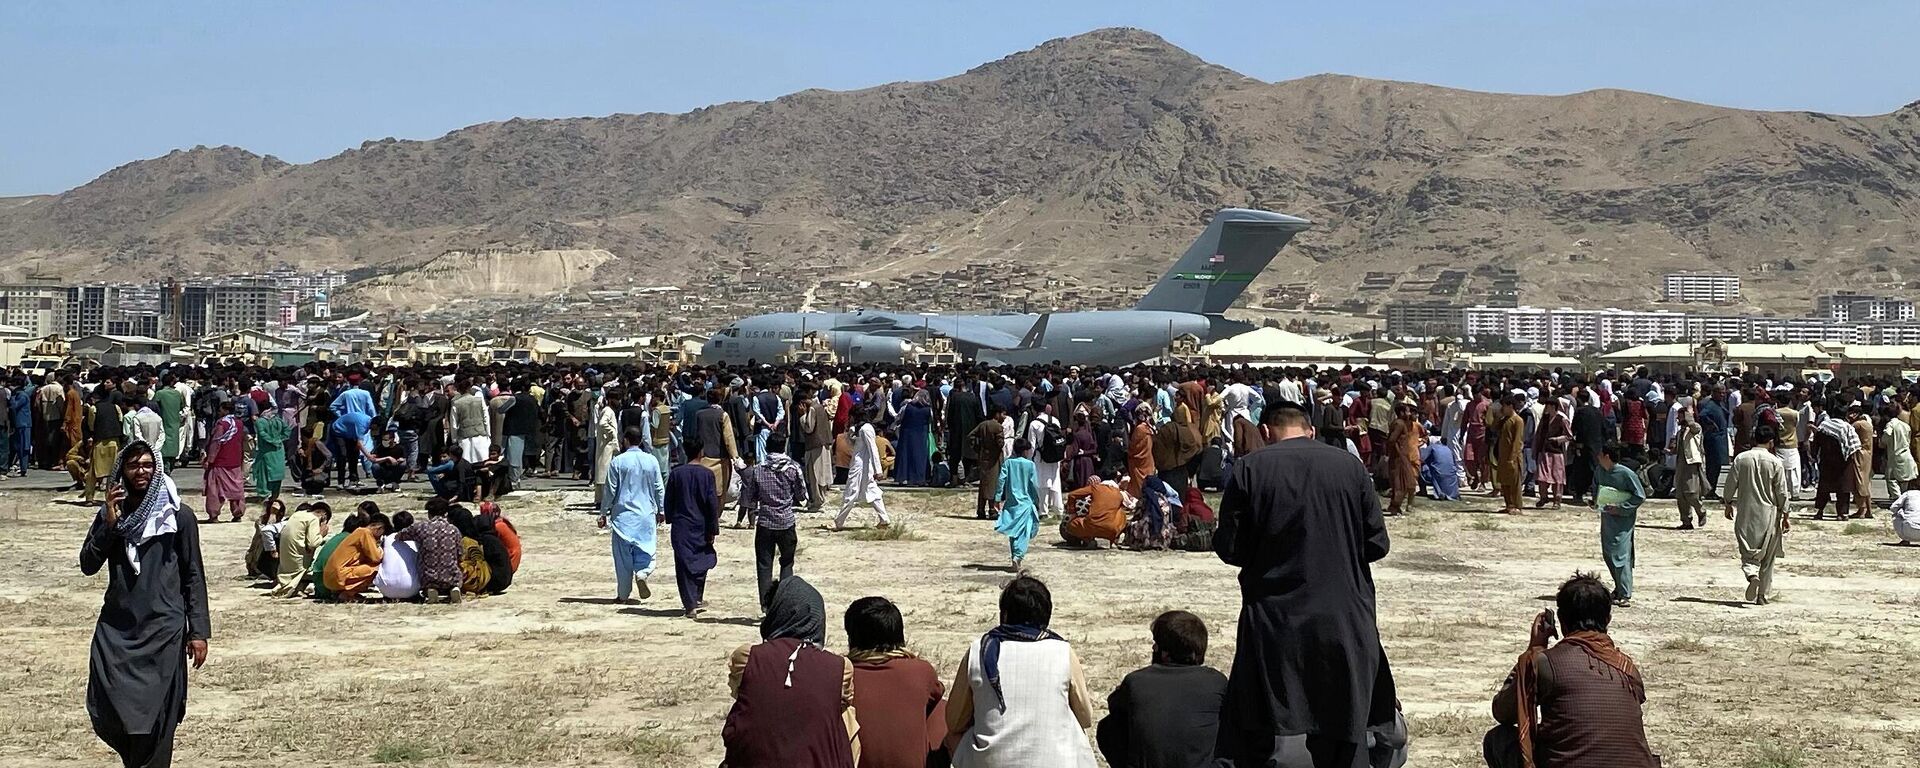  In this Aug. 16, 2021, file photo, hundreds of people gather near a U.S. Air Force C-17 transport plane at the perimeter of the international airport in Kabul, Afghanistan. Ordinary Americans and the nation's airlines are combining to donate miles and cash to help Afghan refugees resettle in the United States. Organizers said Tuesday, Oct. 26, they have raised enough donations pay for 40,000 flights, but they're hoping to nearly double that amount.  - Sputnik International, 1920, 06.03.2024